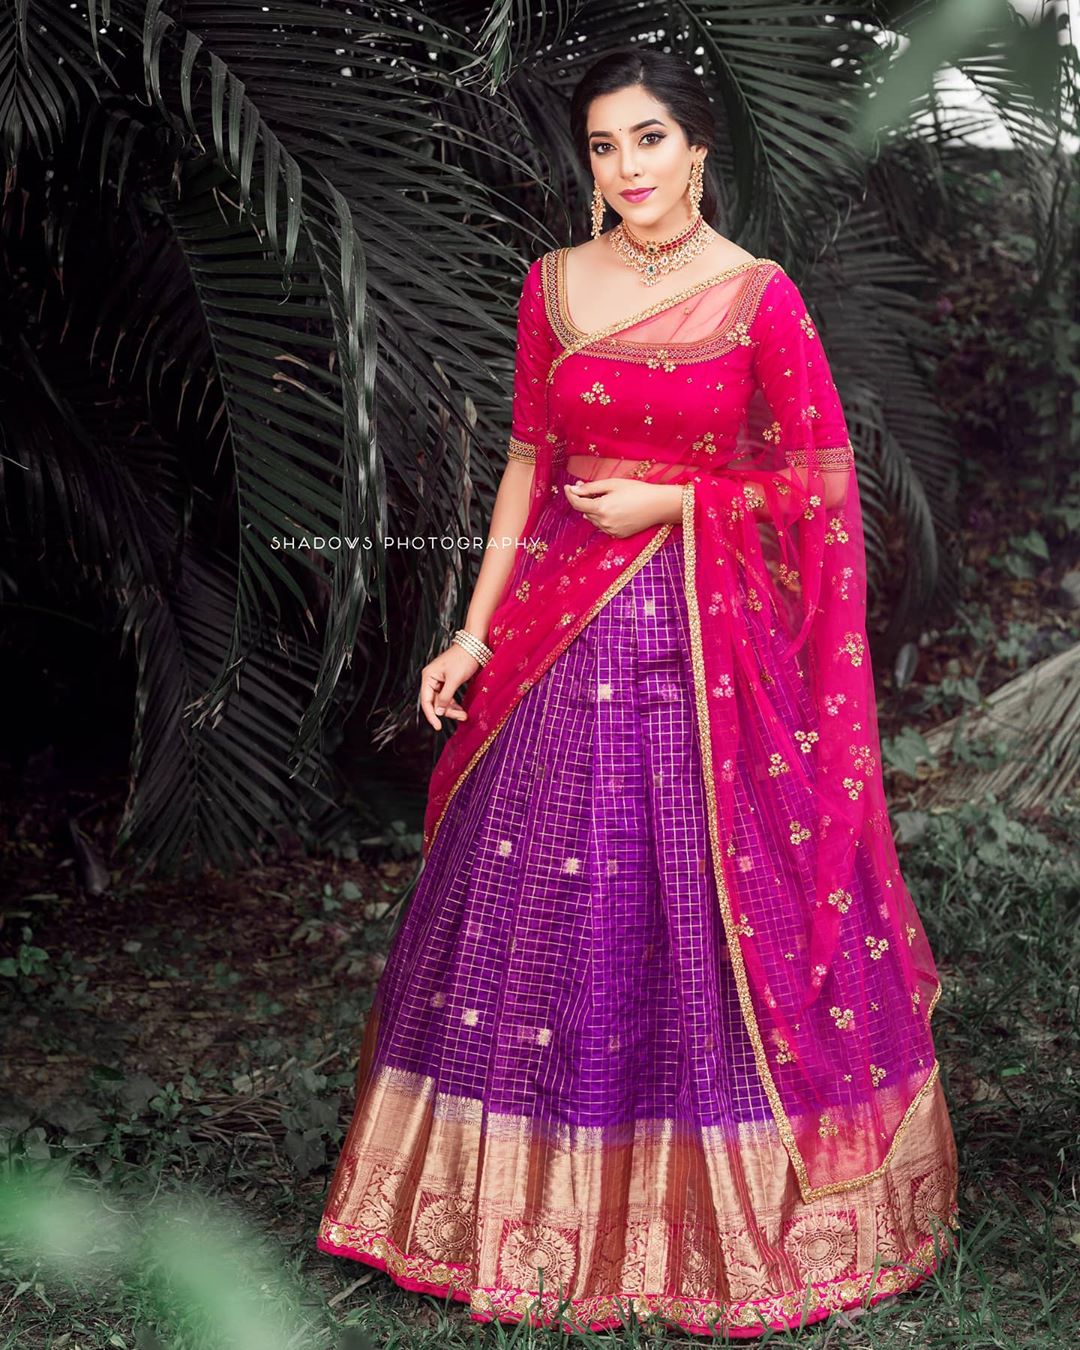 Latest Collection: 999+ Stunning 4K Images of Half Sarees